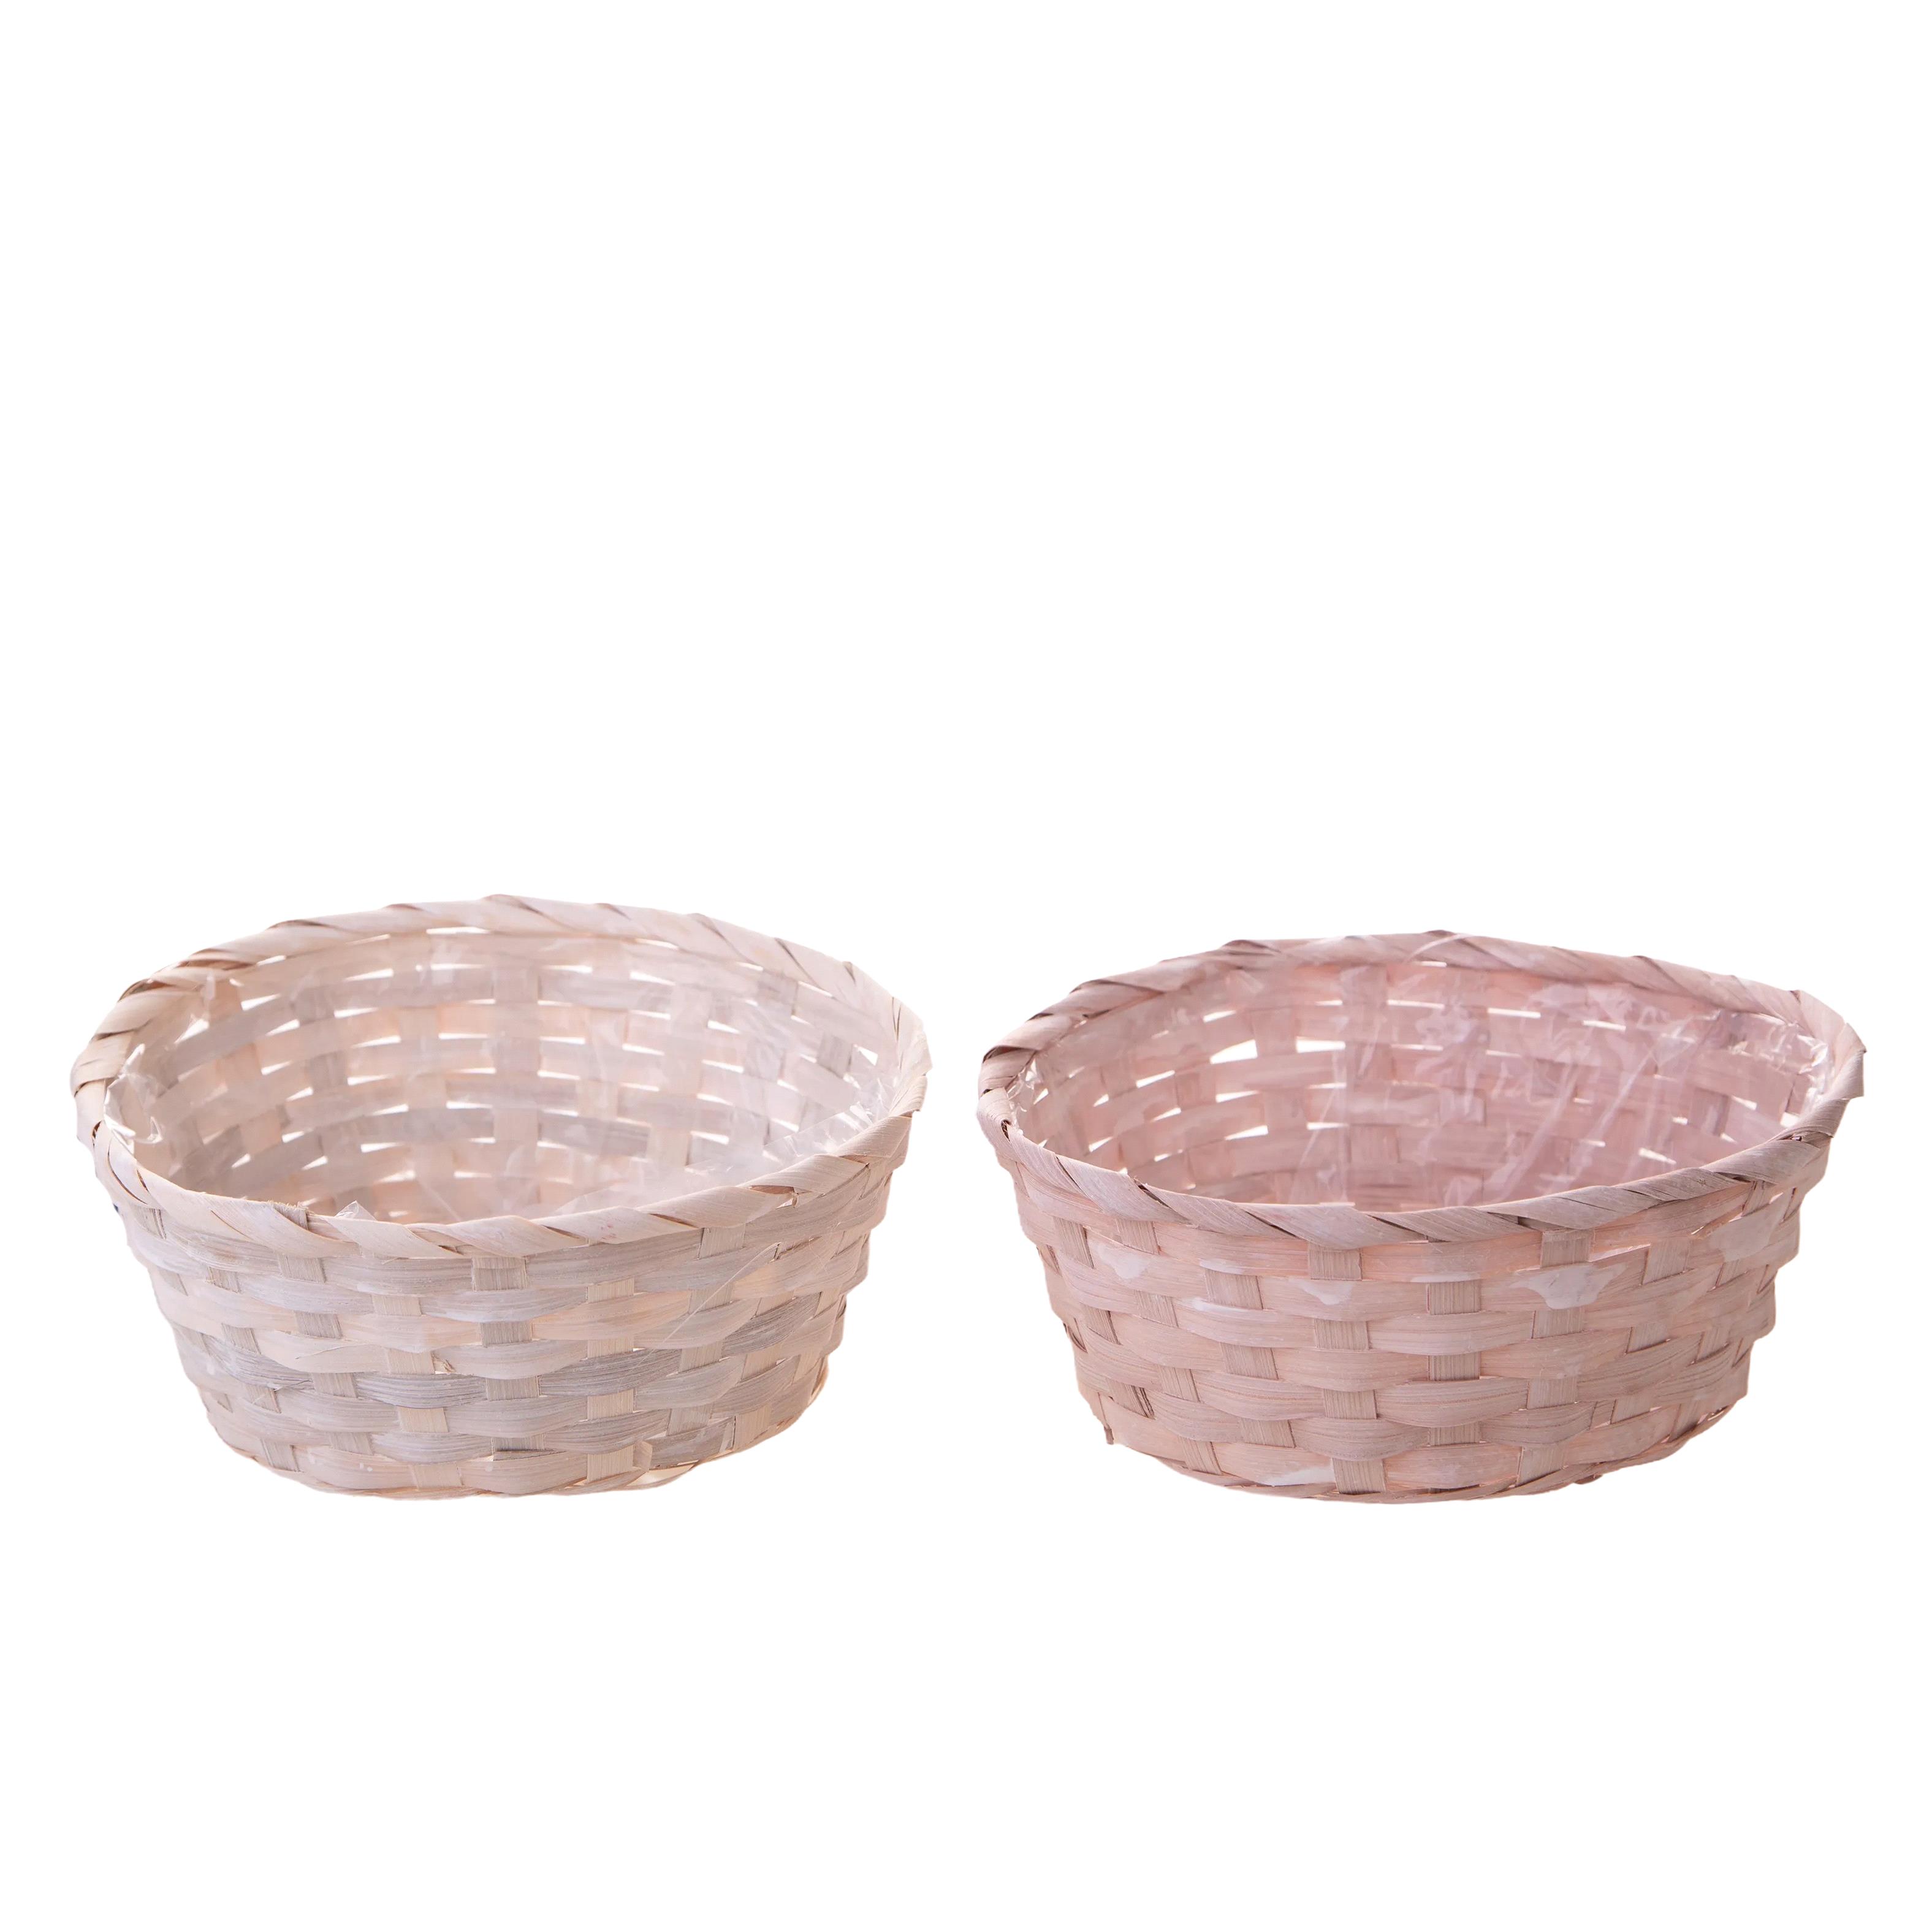 BASKETWORKS, OVAL AND ROUND BASKETS, CIOTOLA VIMINI D.22 CM